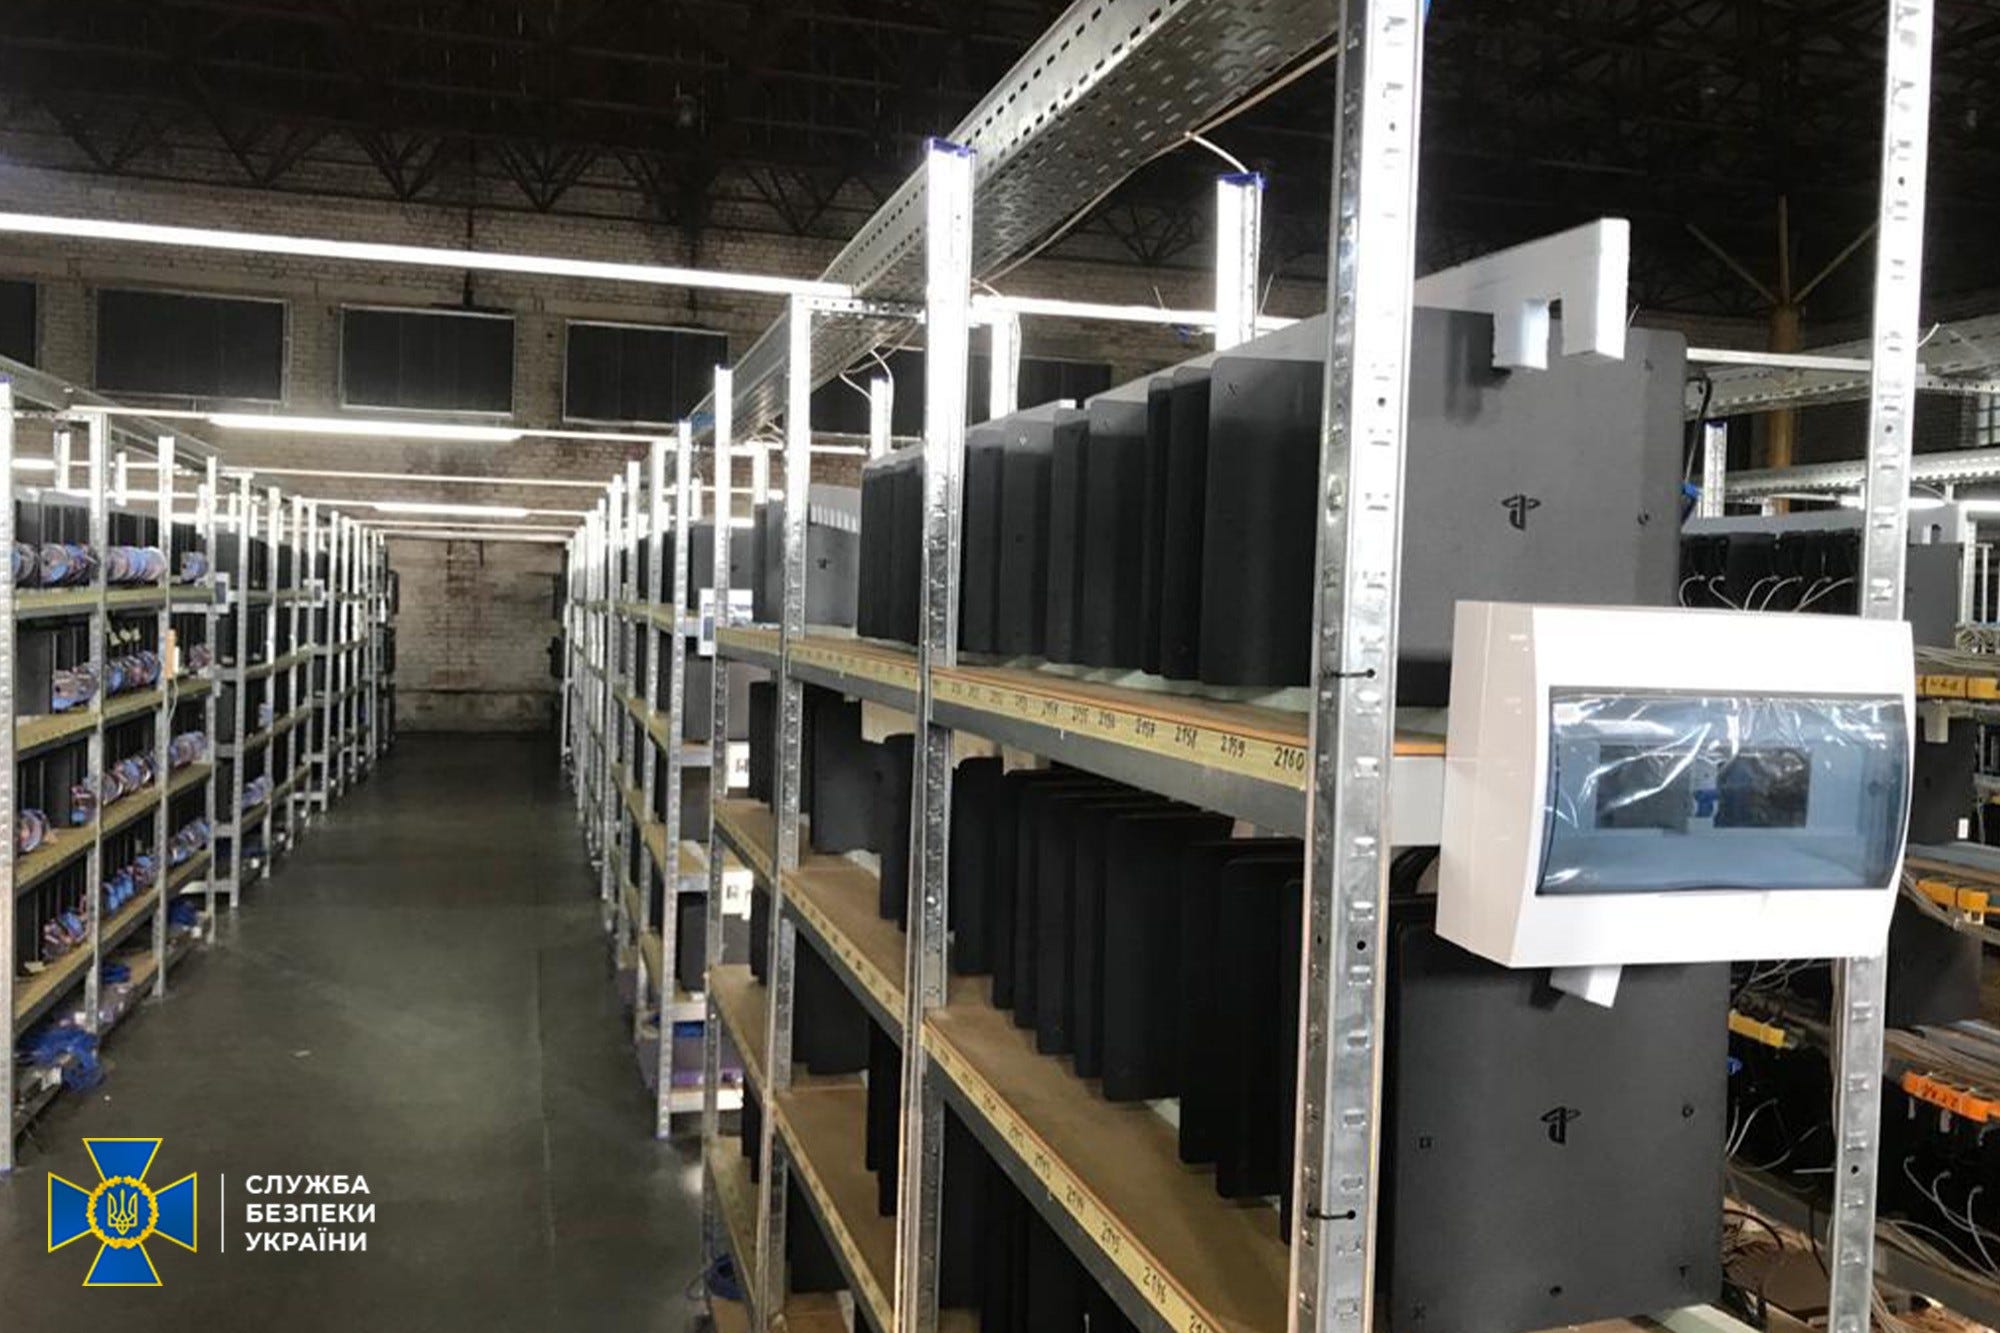 Metal racks with Sony Playstation consoles in a Ukraine crypto mine